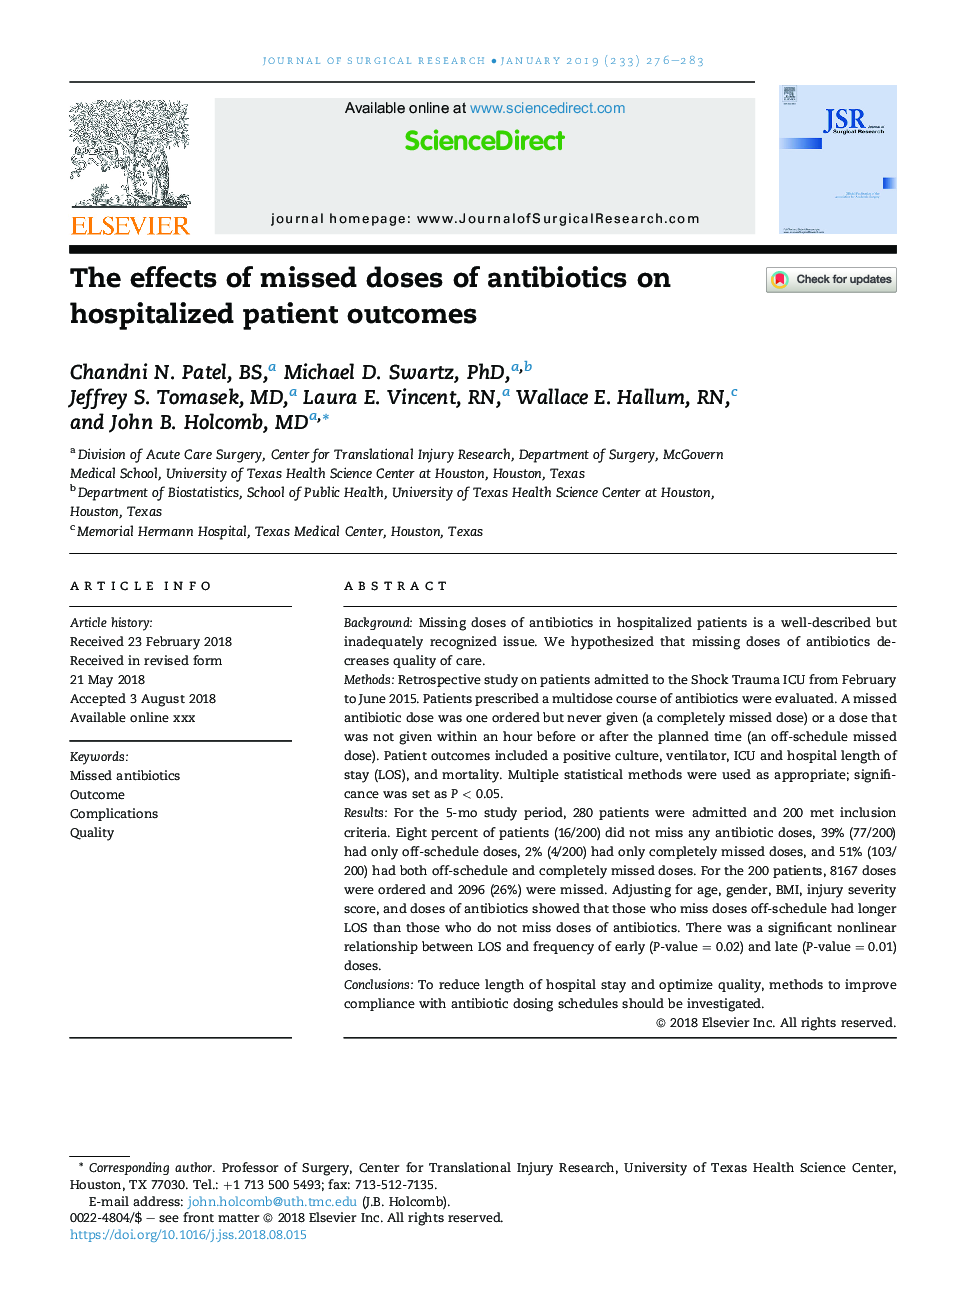 The effects of missed doses of antibiotics on hospitalized patient outcomes